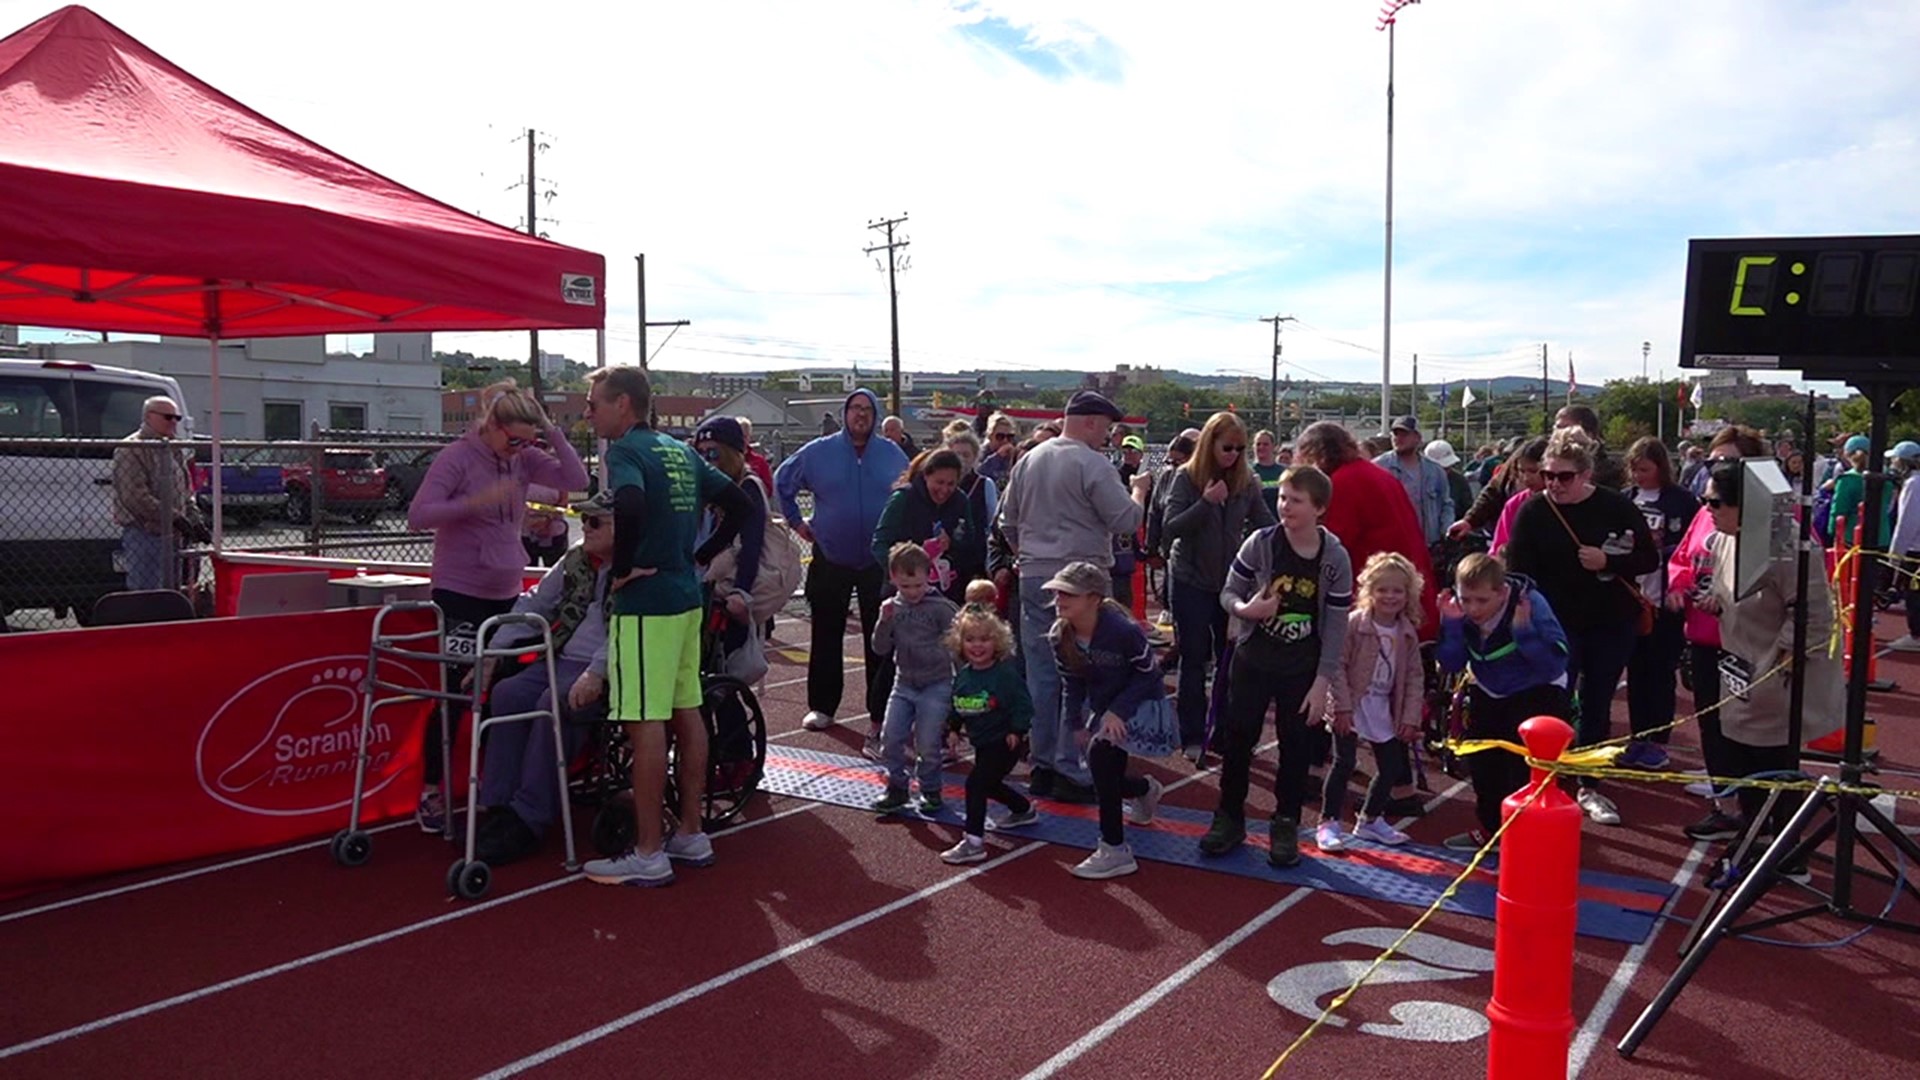 Folks all across Northeastern Pennsylvania gathered in Scranton for the Team Allied 5k & All-Abilities Walk, where participants of all abilities finished strong.